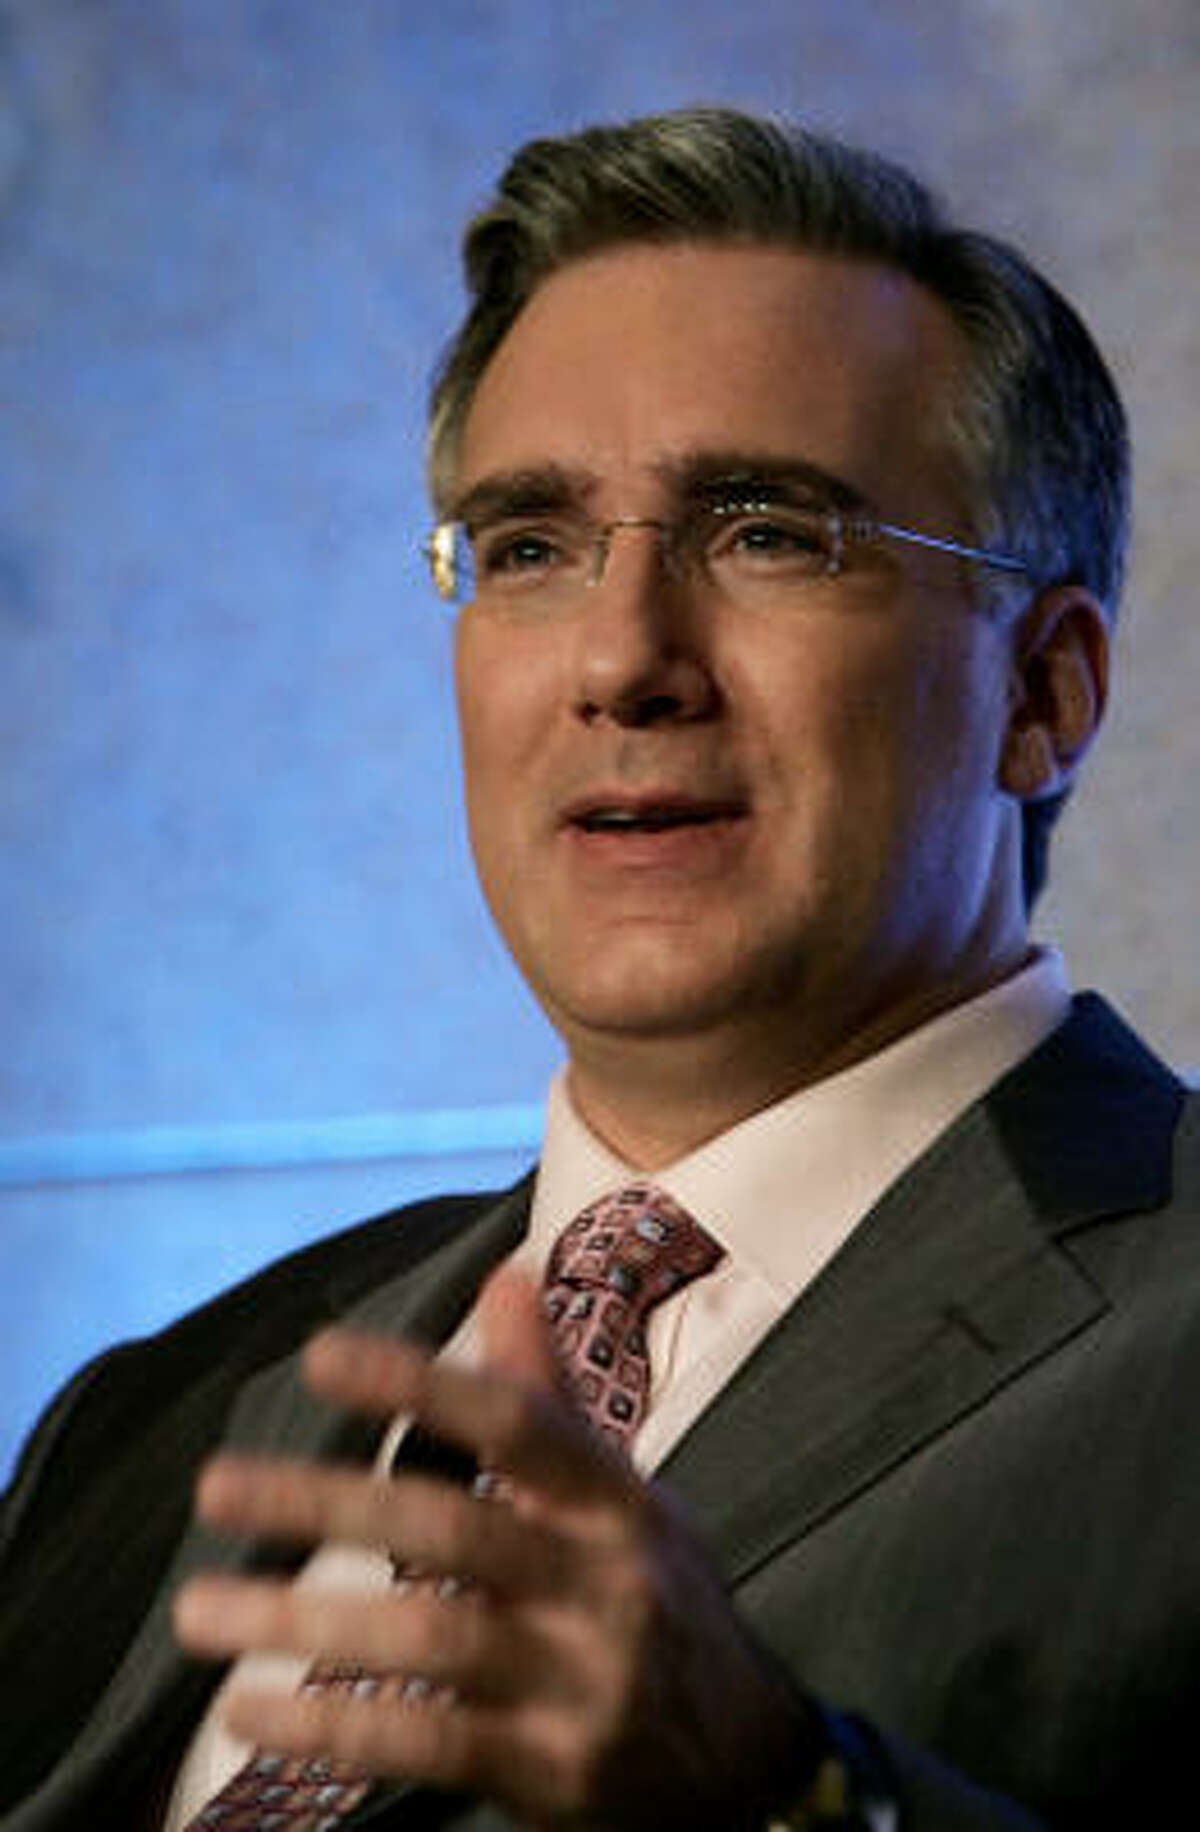 Liberal host Keith Olbermann was suspended from the network for two days last year.